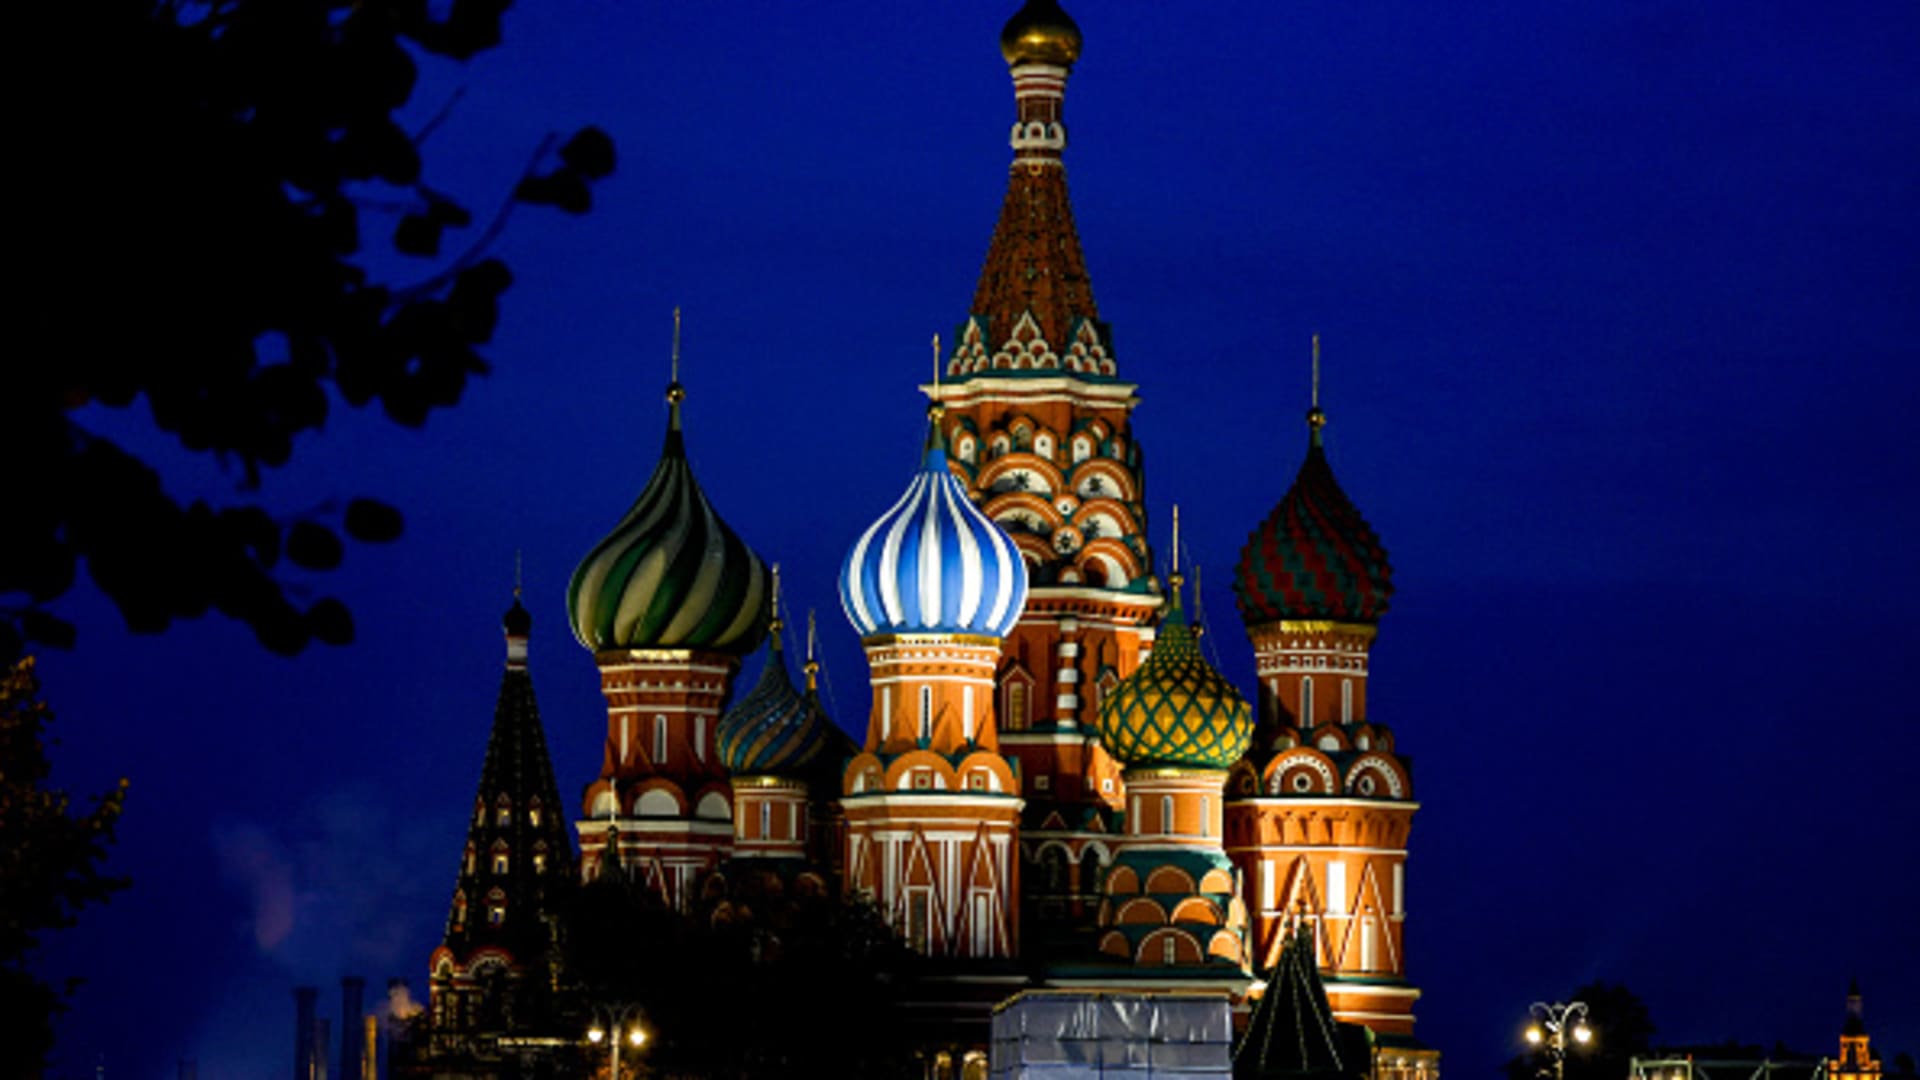 A view of Cathedral of St. Basil the Blessed at night in Moscow, Russia on October 27, 2022.